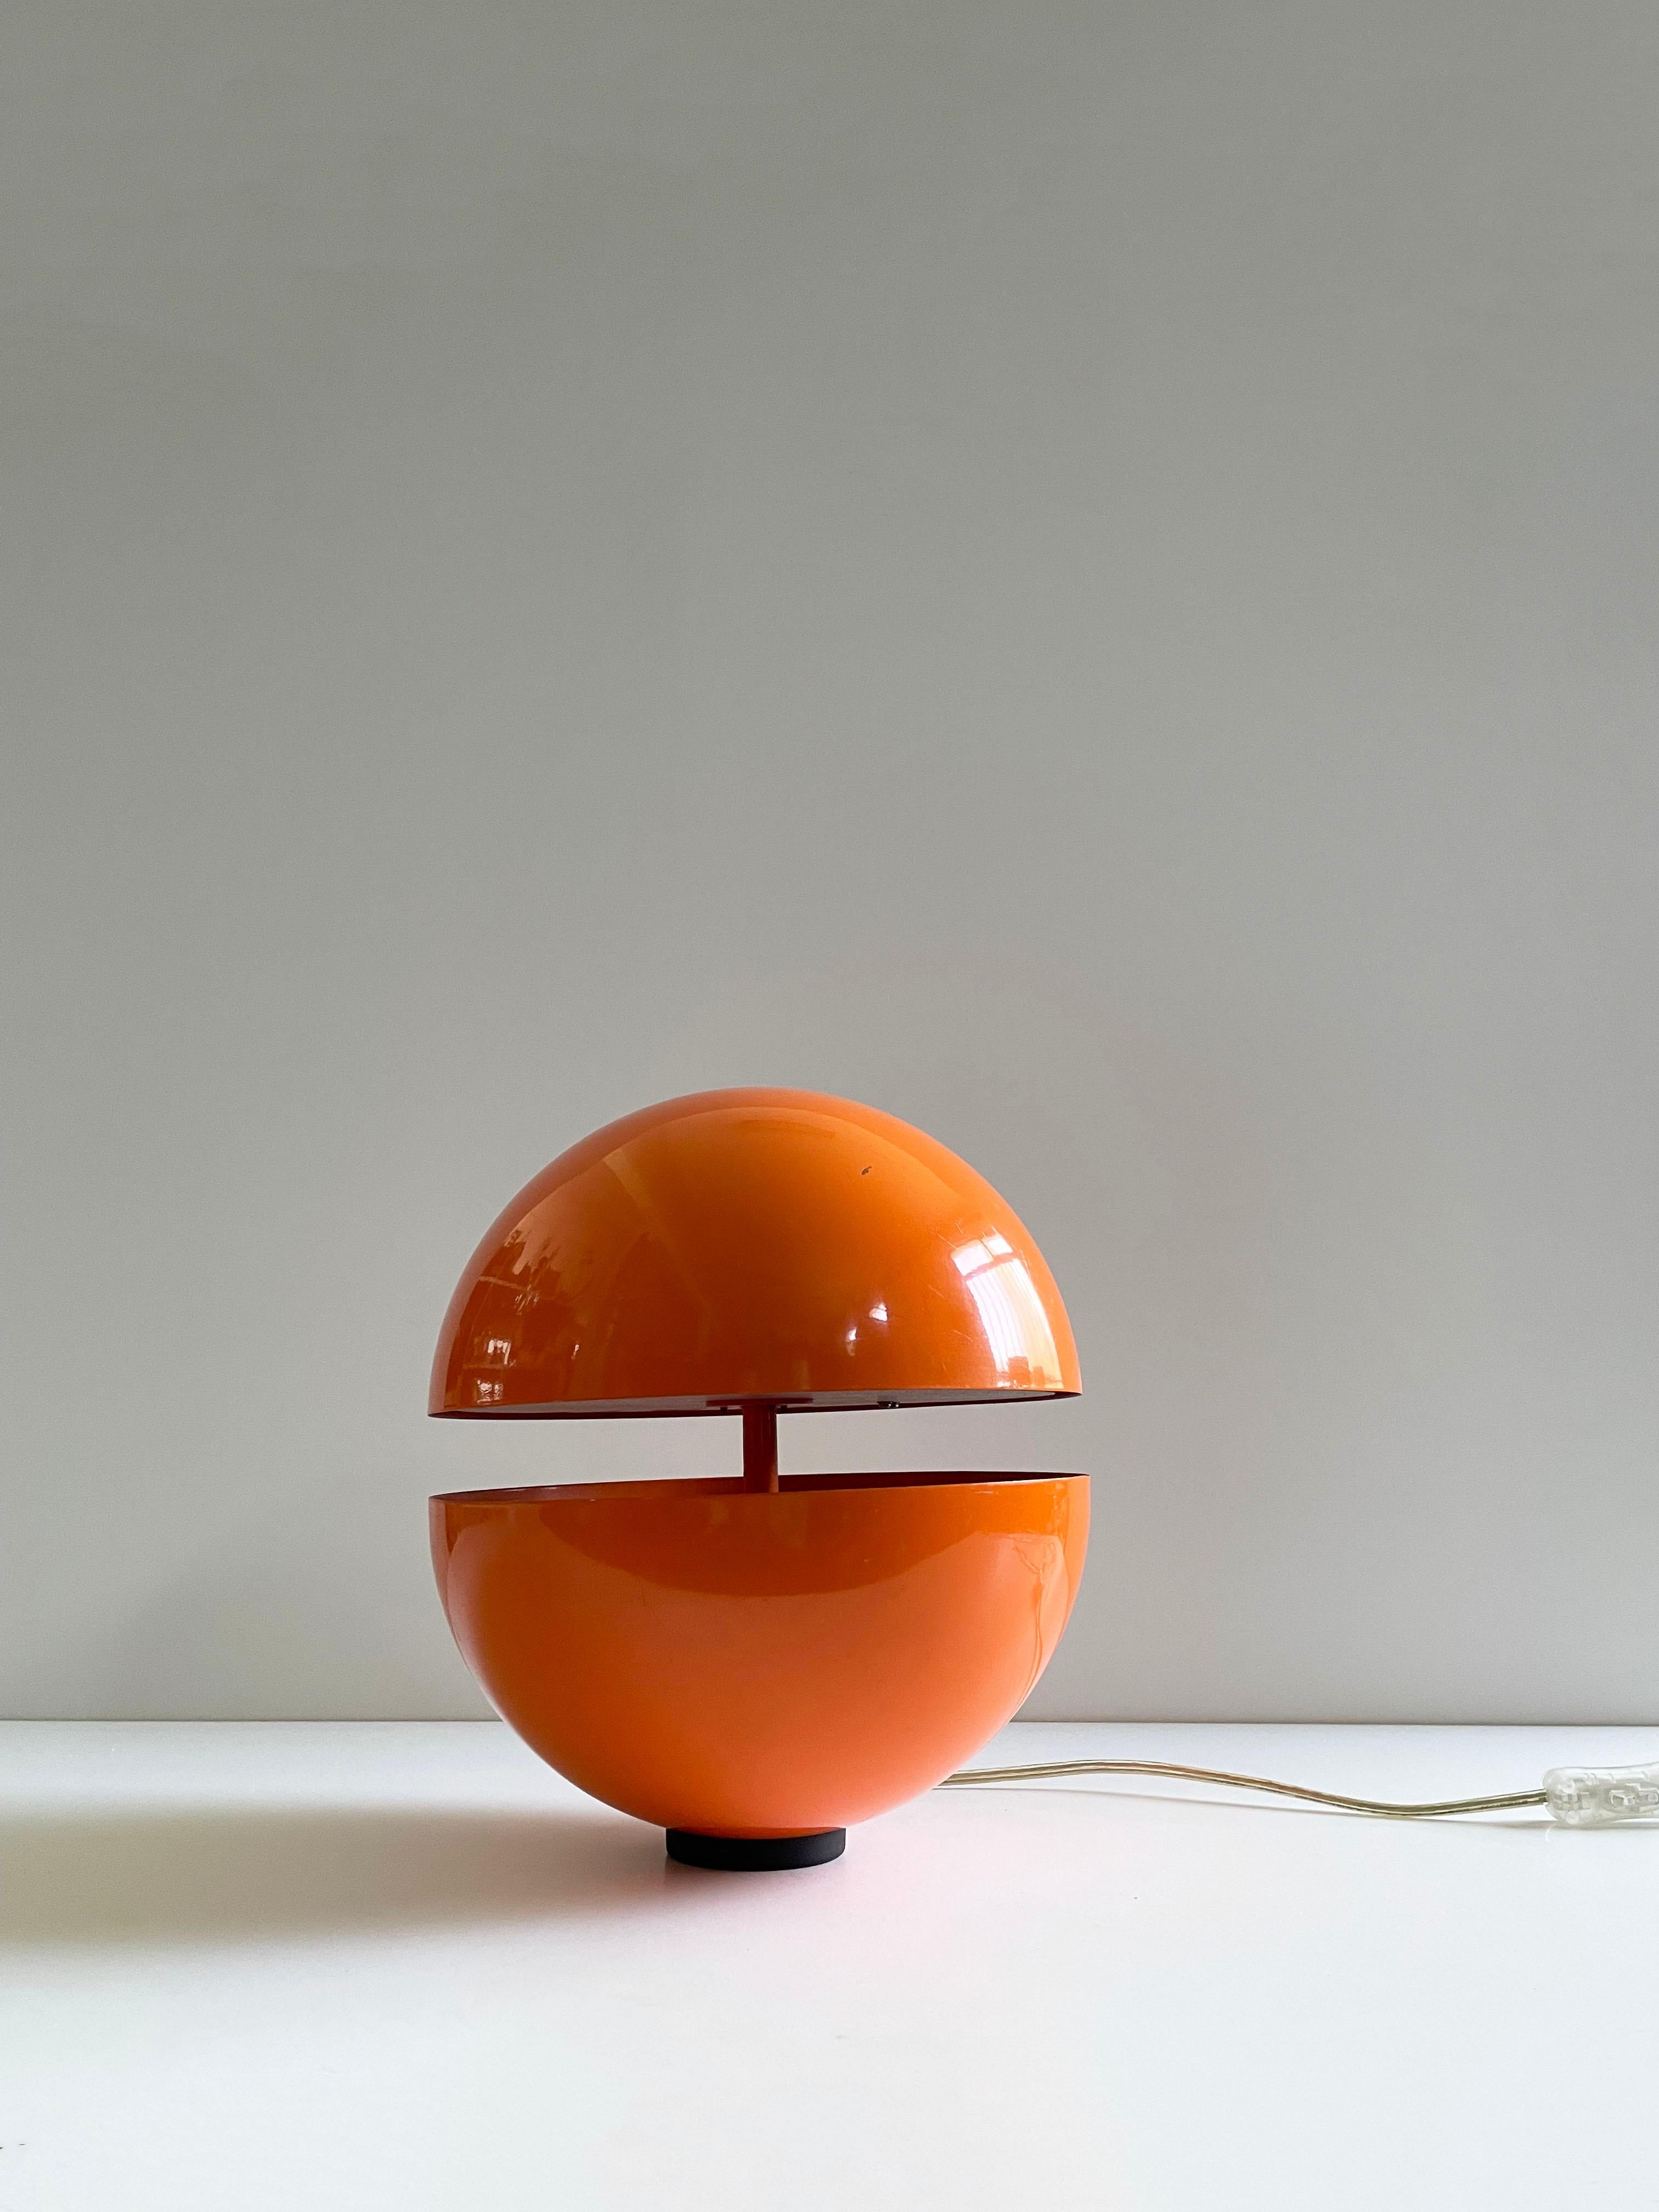 Vintage globe-shaped lamp designed by Andrea Modica and produced by Lumes, Switzerland 1980s 1990s

The lamp is stamped, it has an on/off switch, the metal made globe is lacquered in vibrant orange colour. Inside the lamp is a brushed glass disc